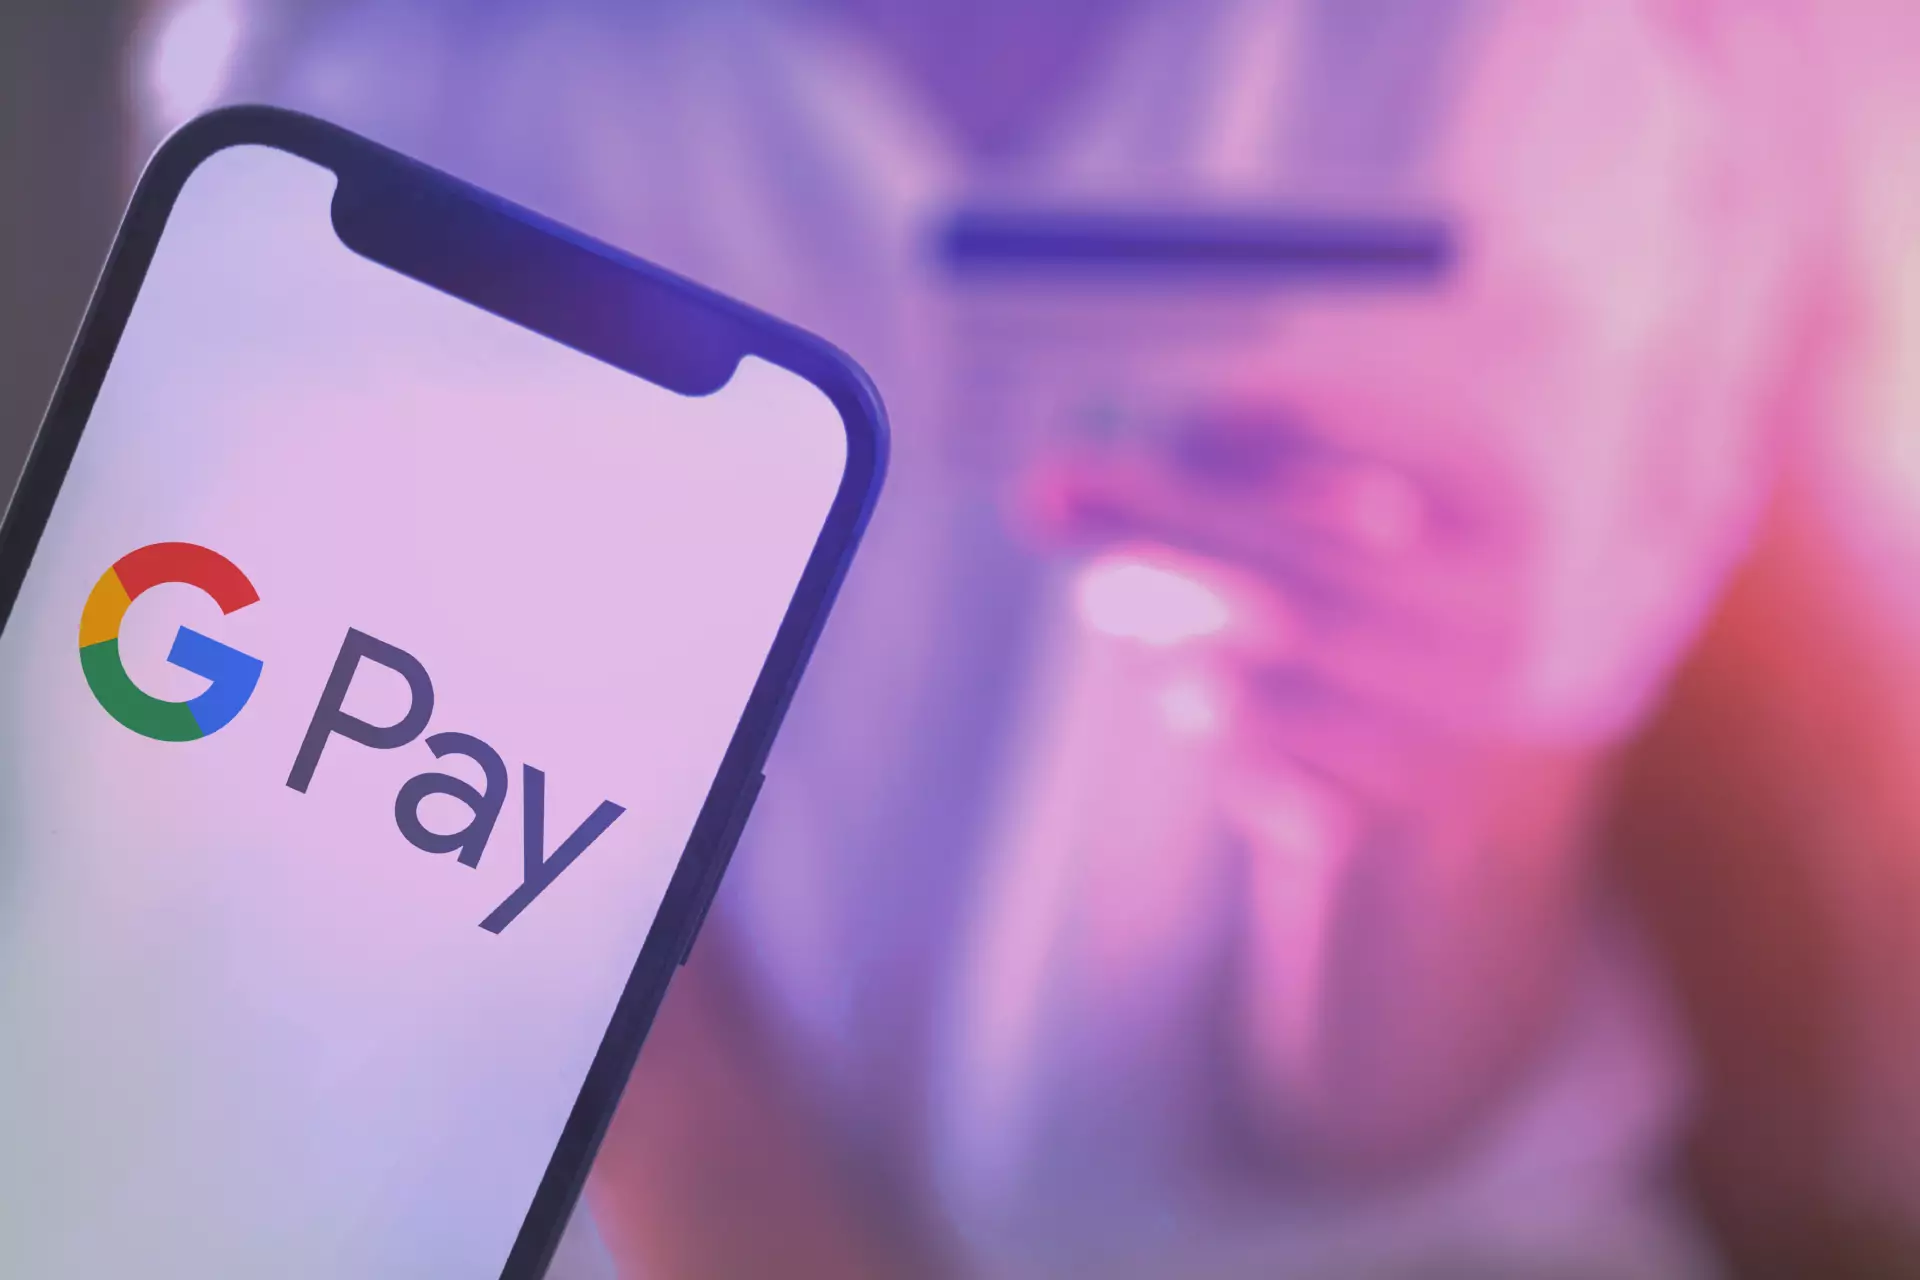 GPay is a payment service created by a team from Google.